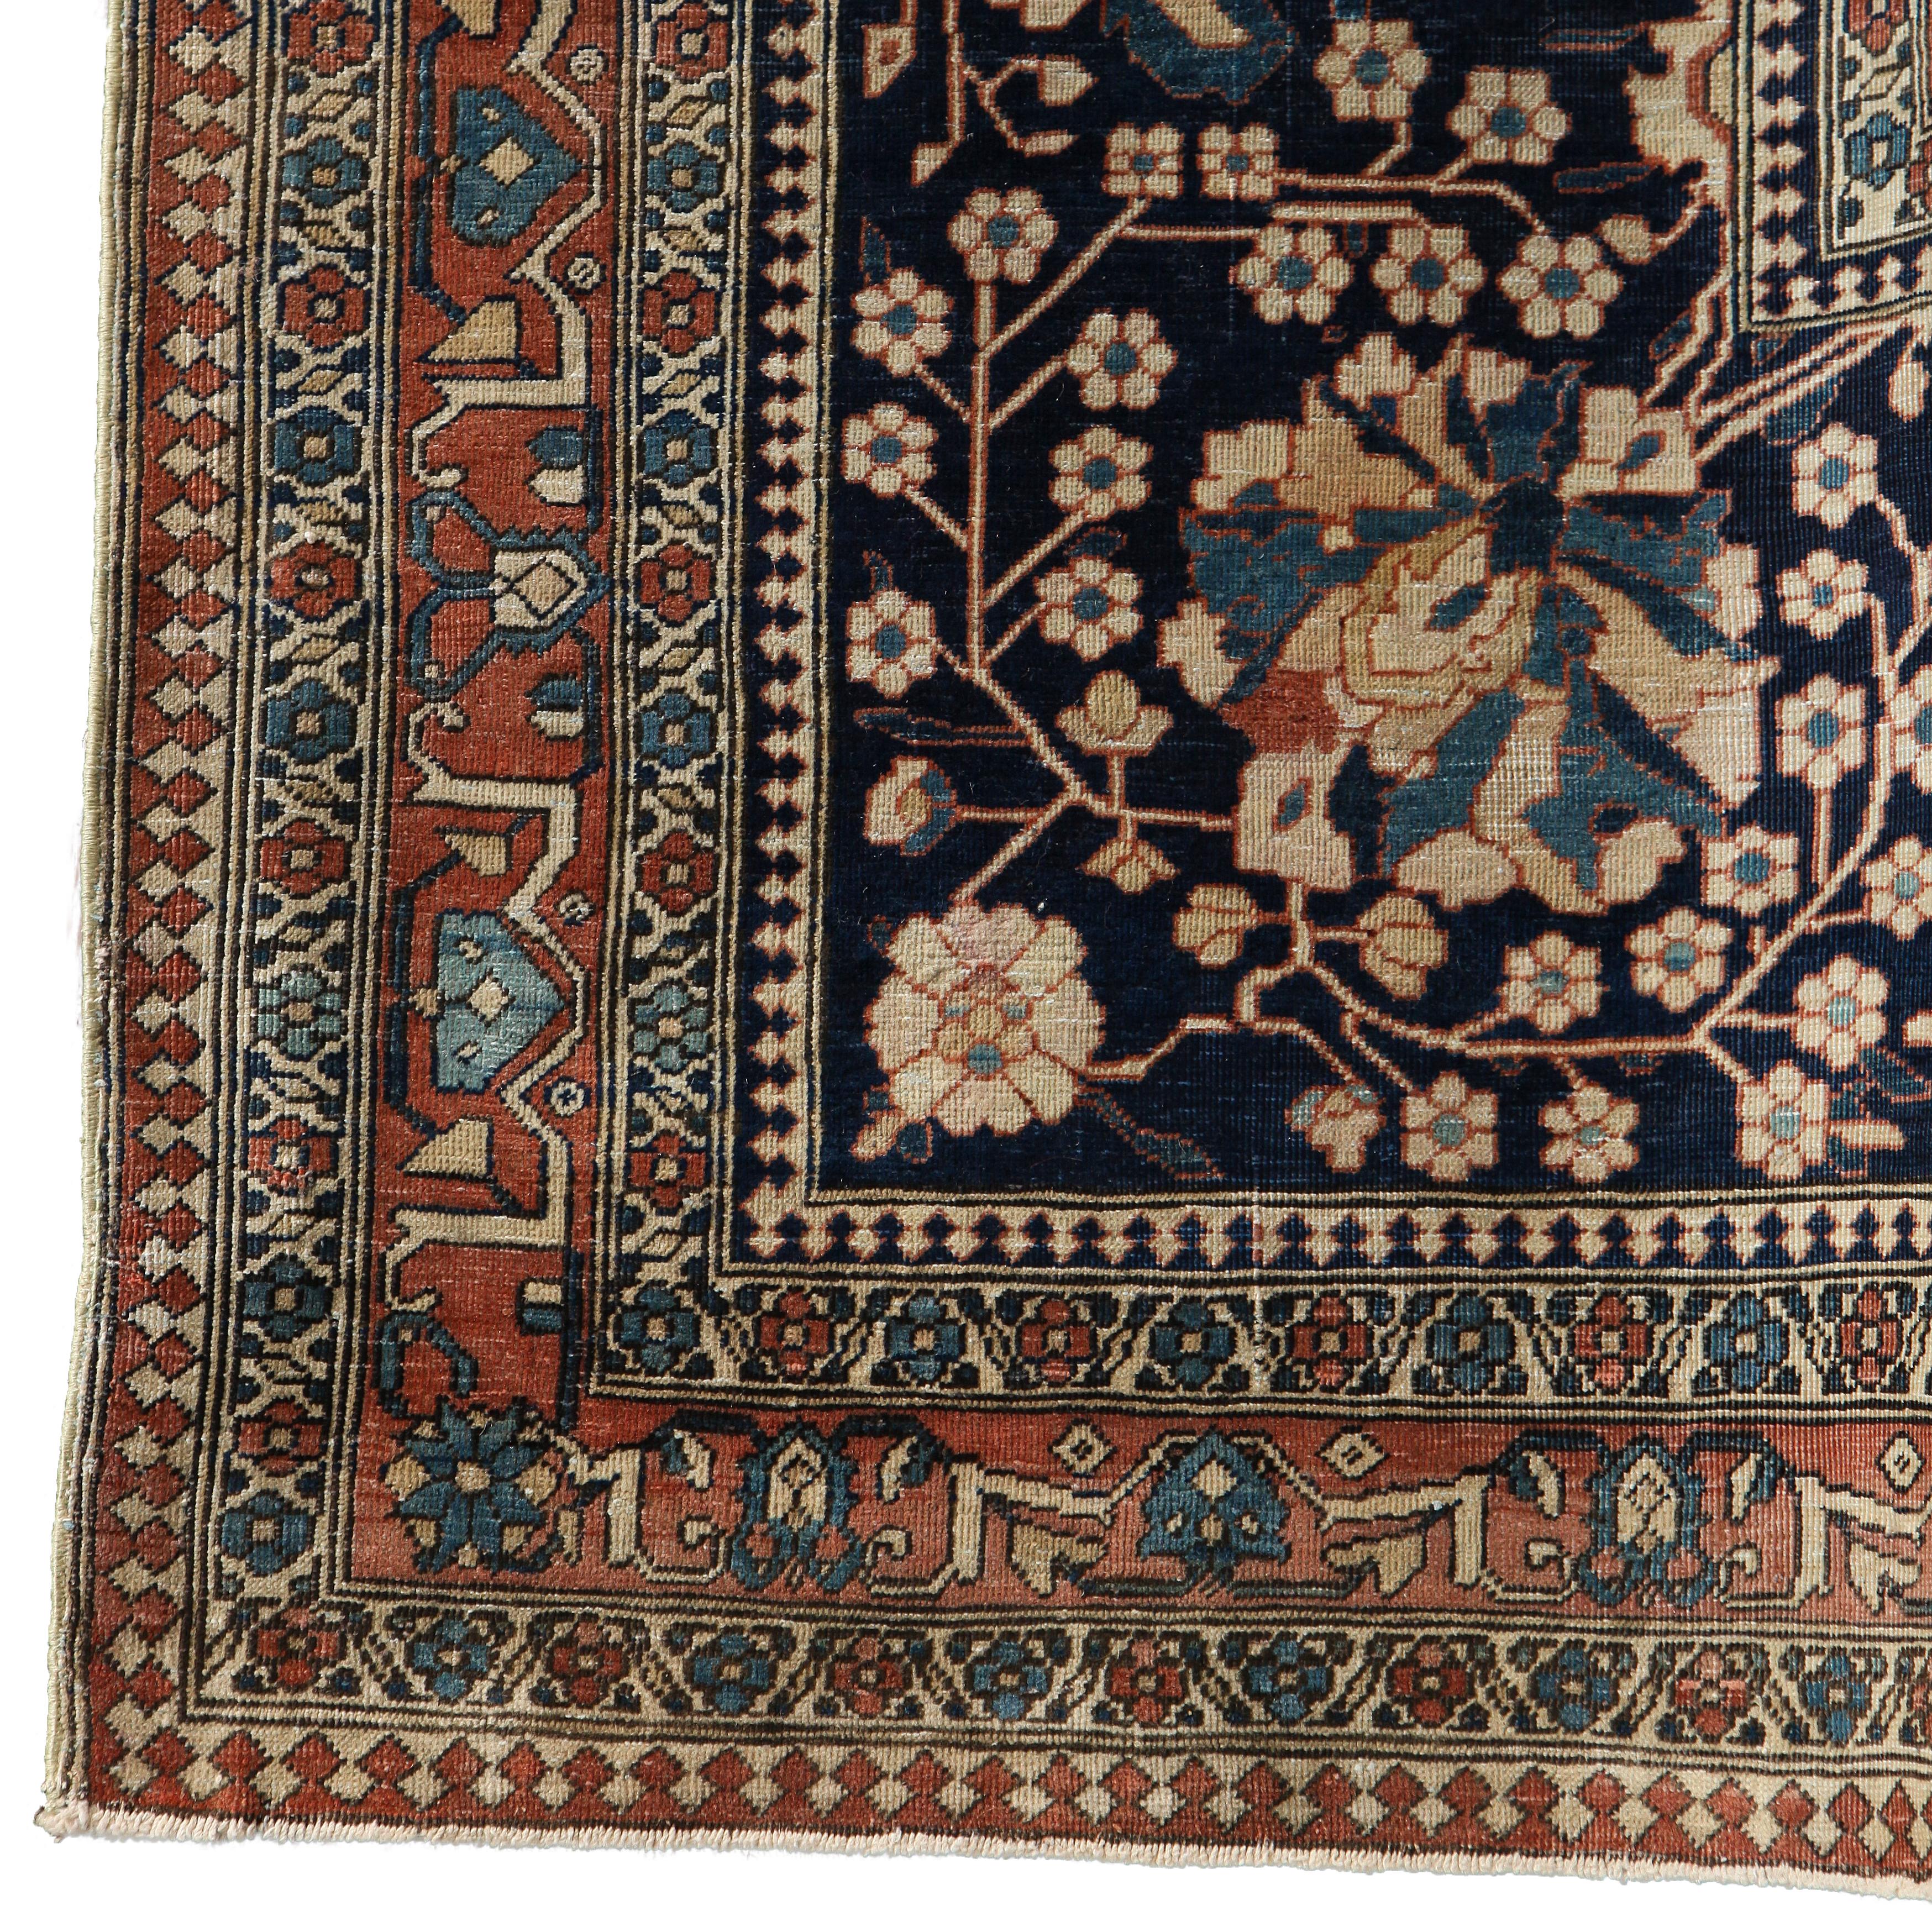 Hand-knotted Antique 1870s Wool Persian Kashan Mohtasham Rug, 9' x 12' In Excellent Condition For Sale In New York, NY